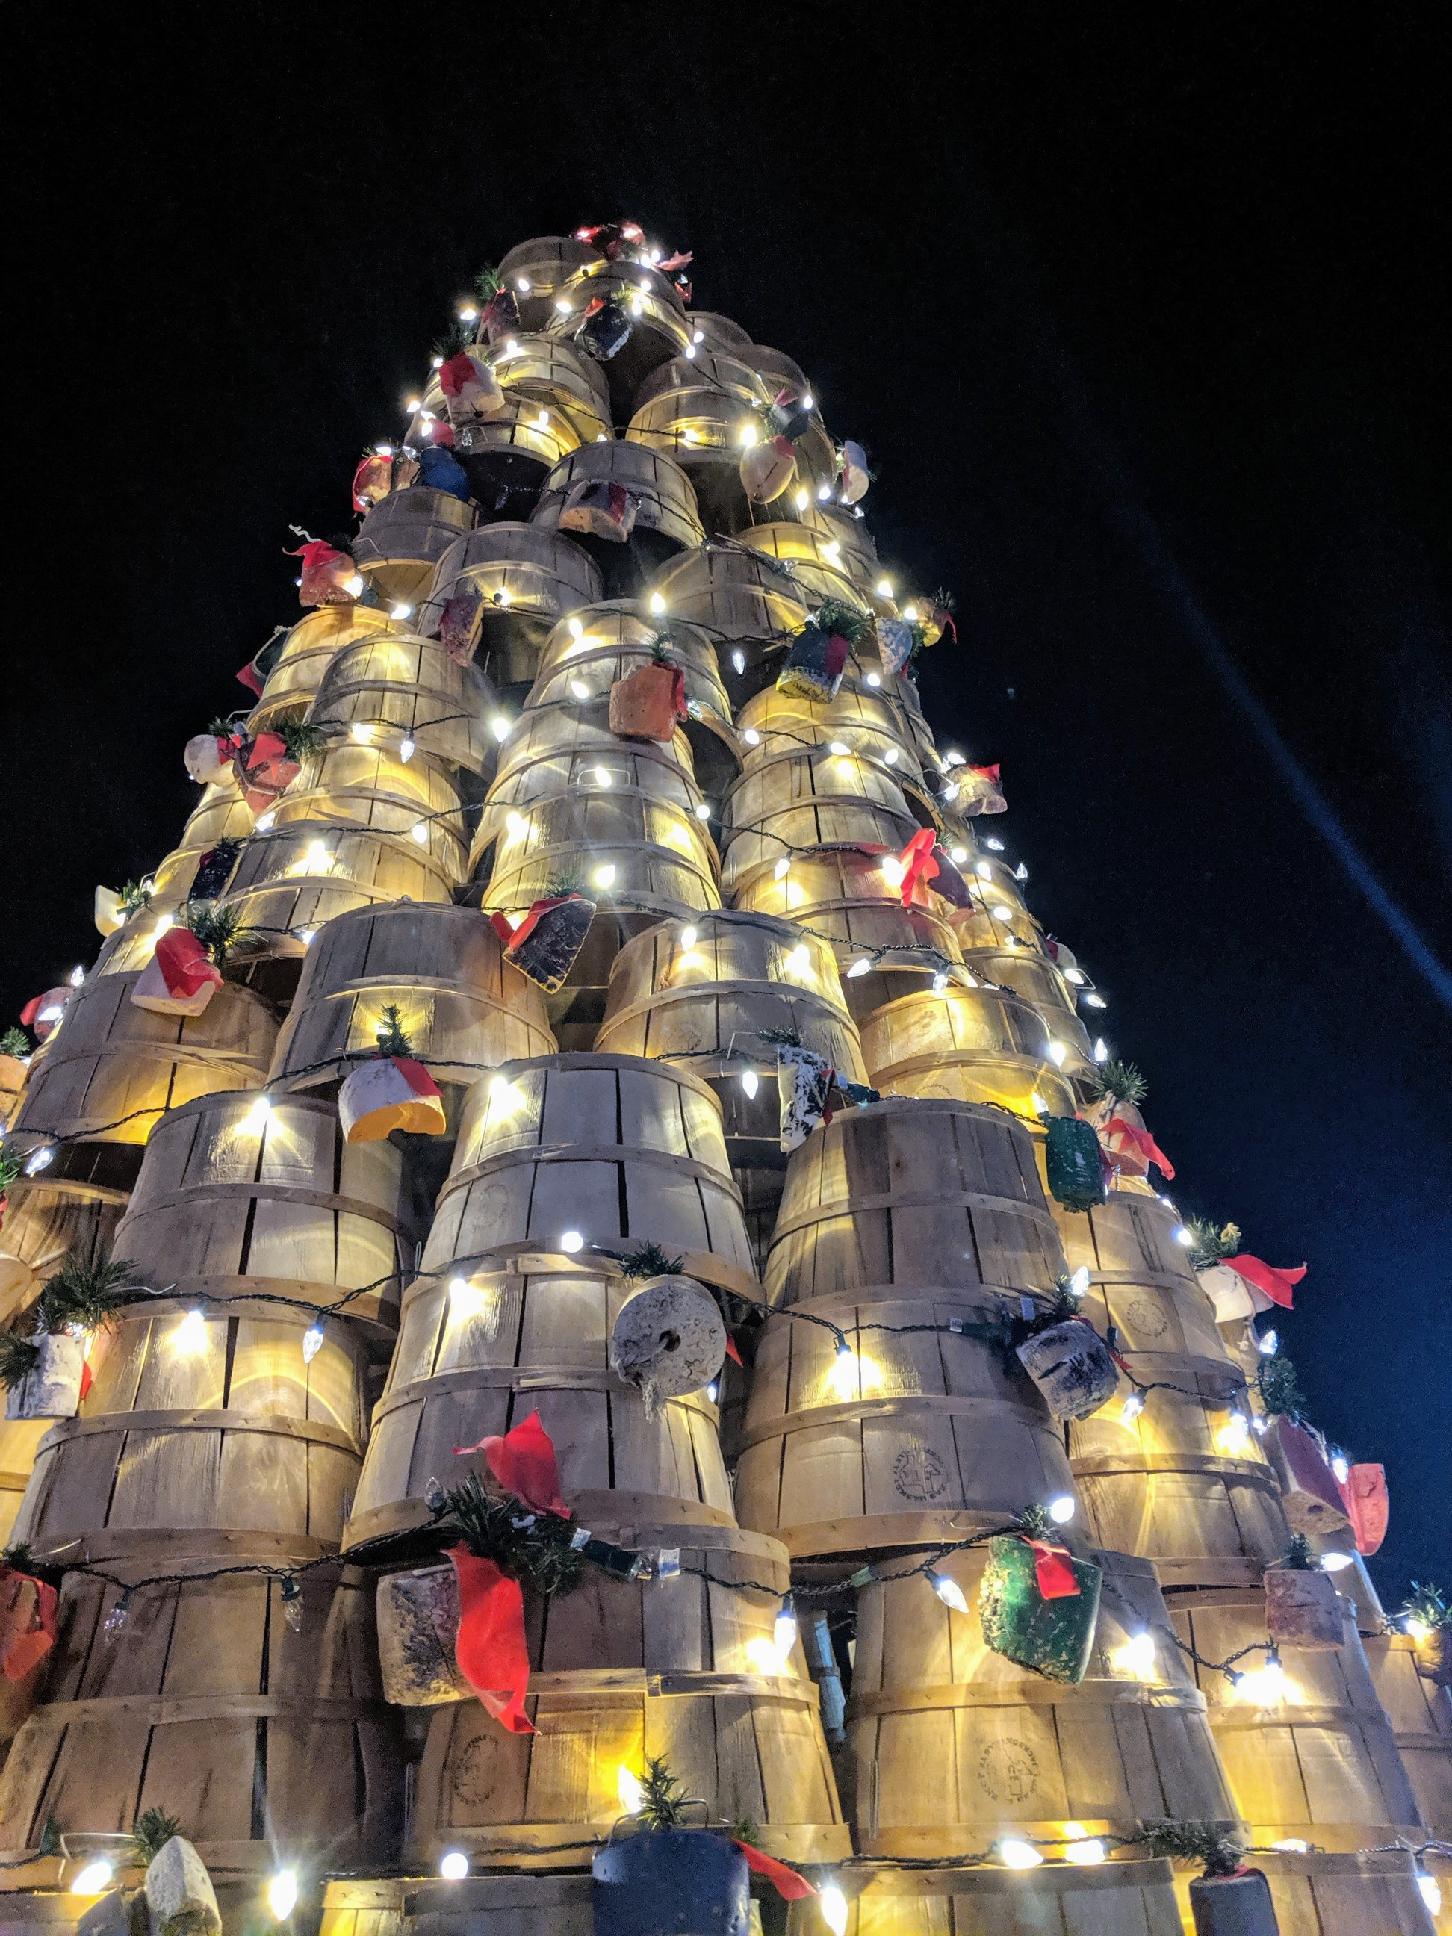 The City of Cambridge’s holiday decorations include a tree made from bushel baskets and decorated with buoys.